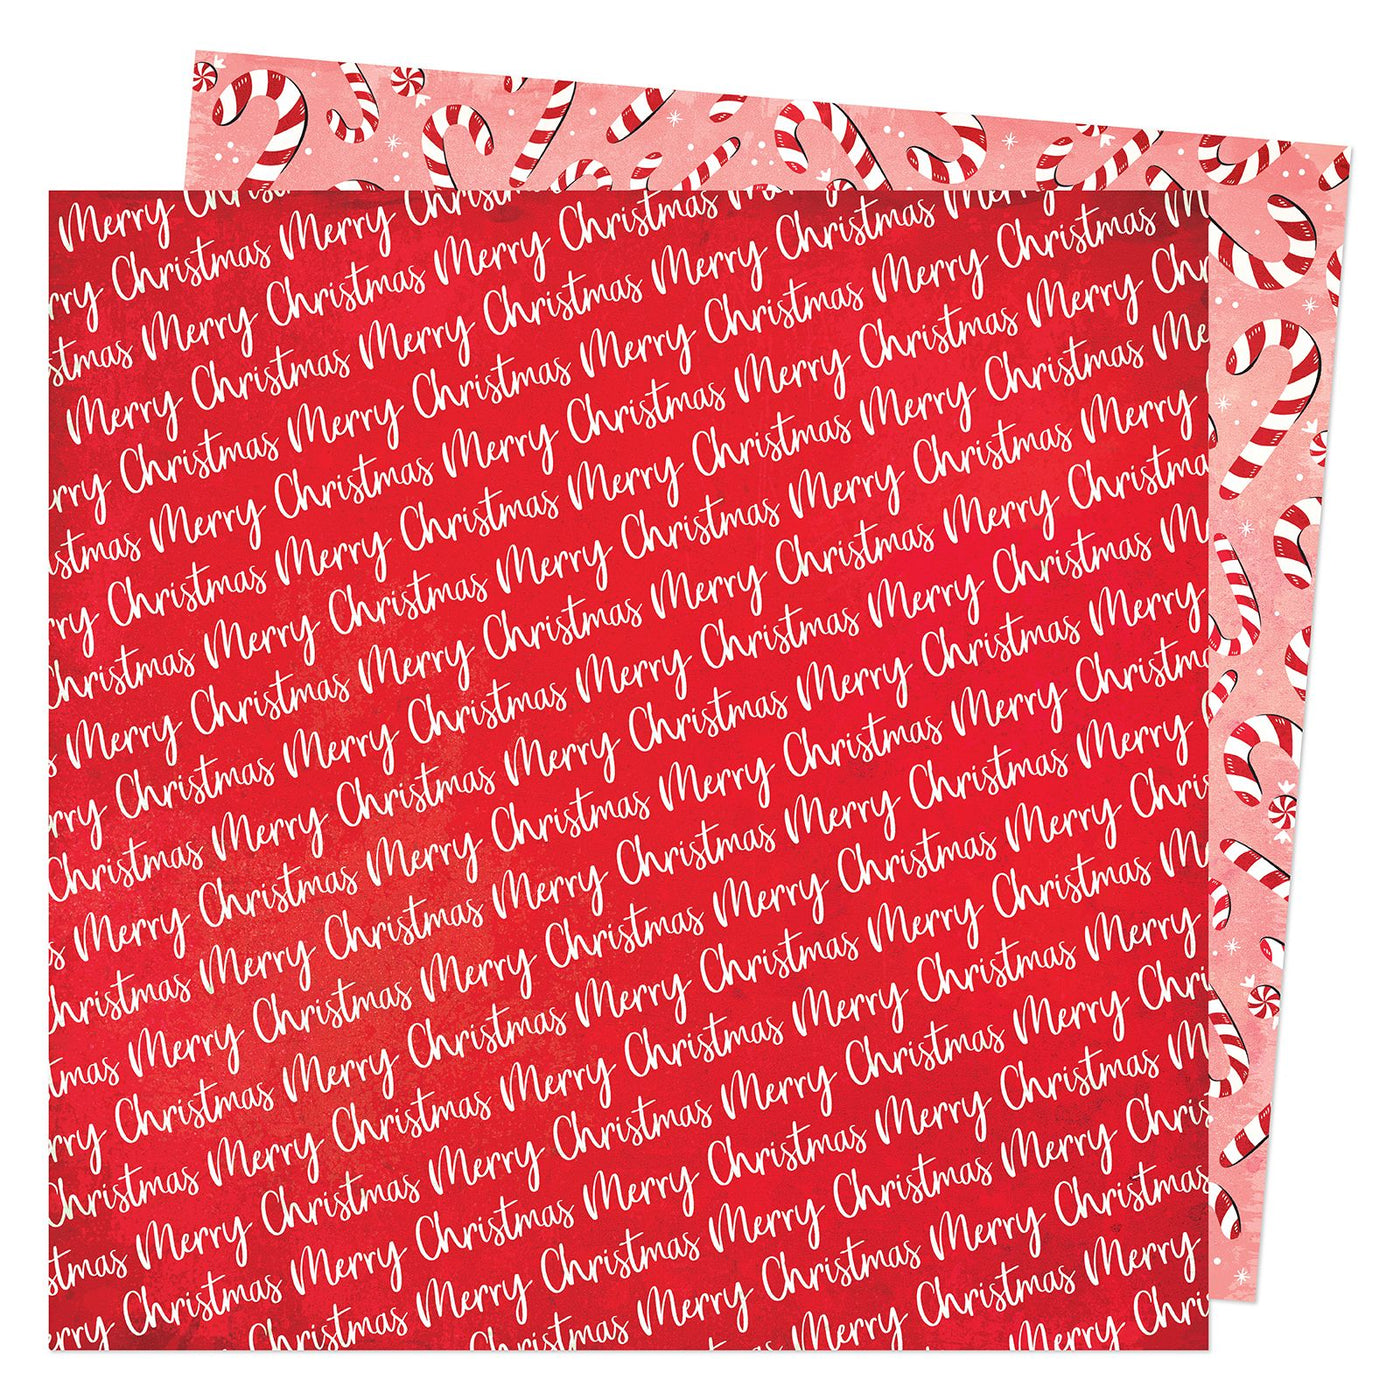 12x12 patterned cardstock (Side A - words "Merry Christmas" all over on a red background, Side B - Christmas candy canes on a pink background) Archival quality.